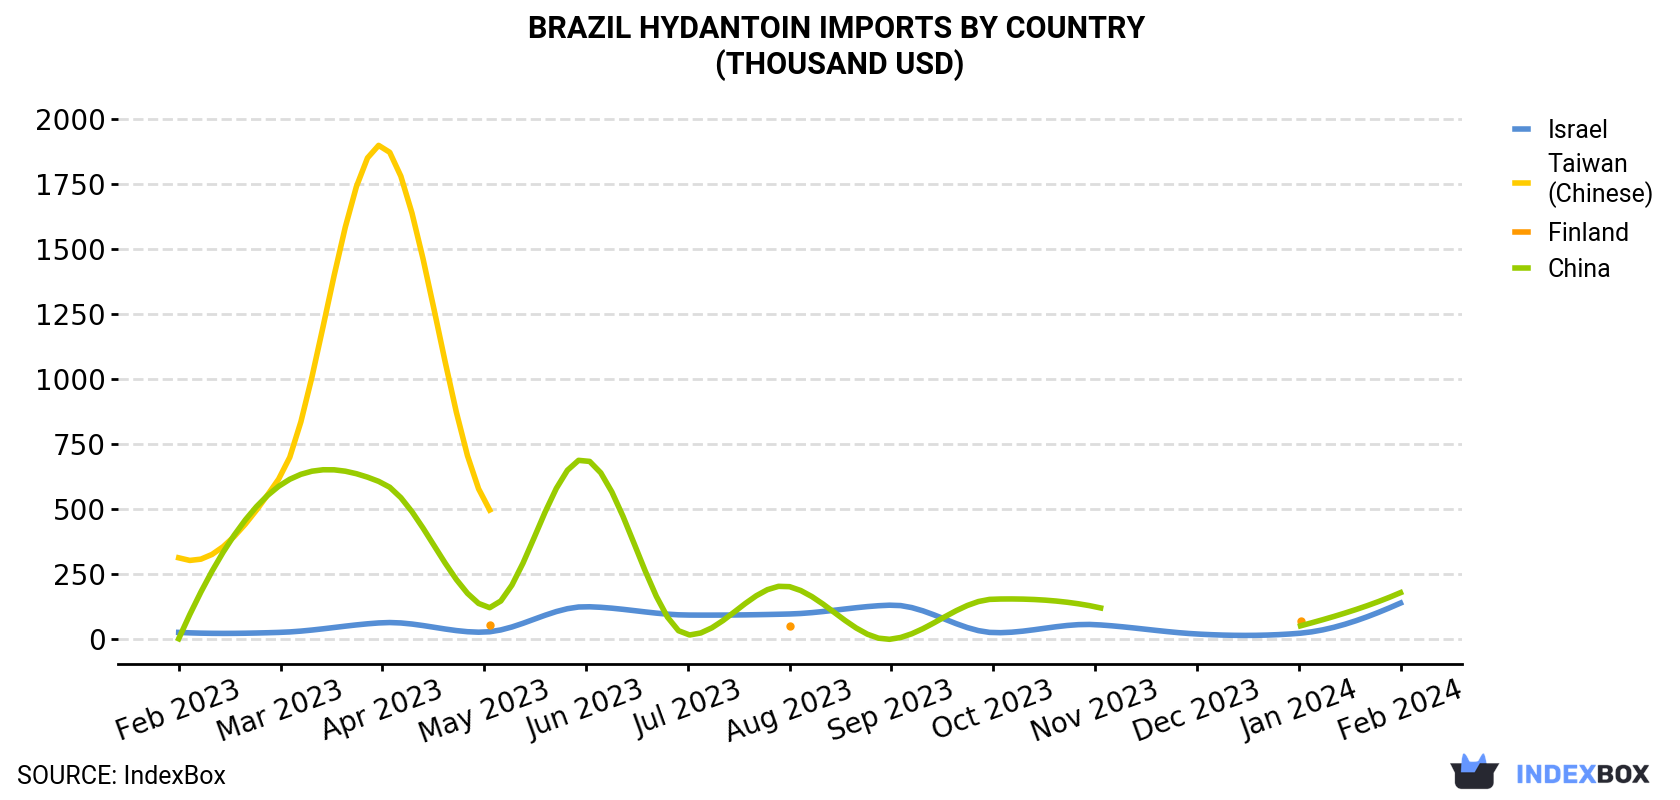 Brazil Hydantoin Imports By Country (Thousand USD)